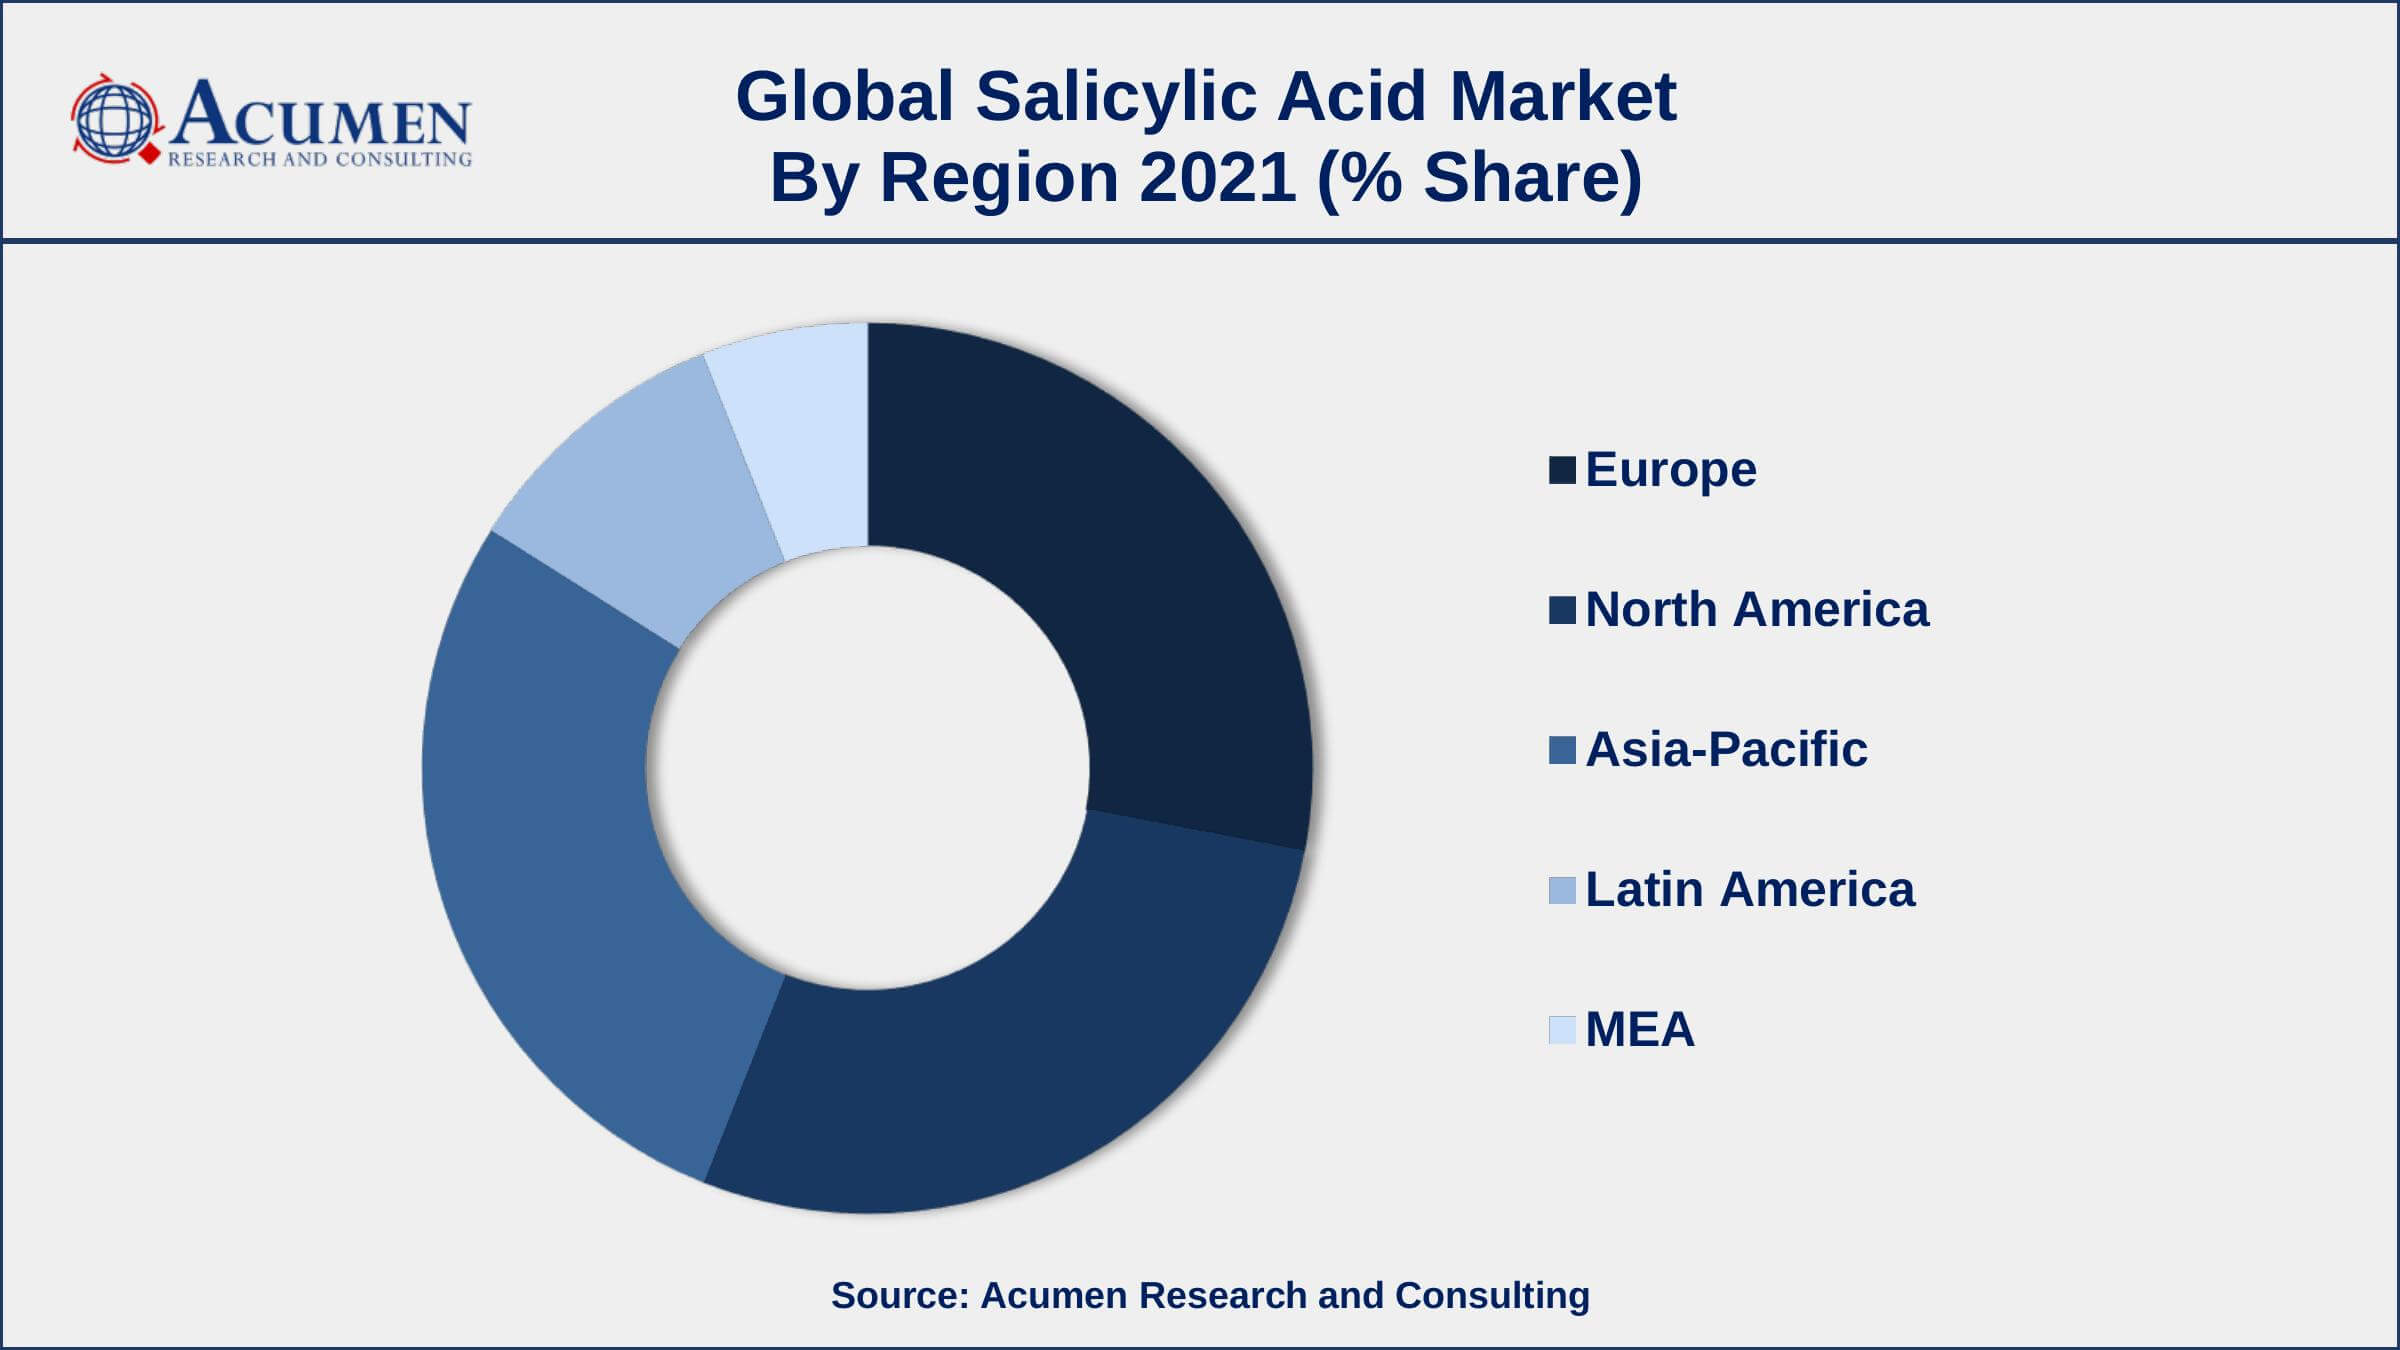 Increased use of sunscreen and anti-acne products, drives the salicylic acid market size